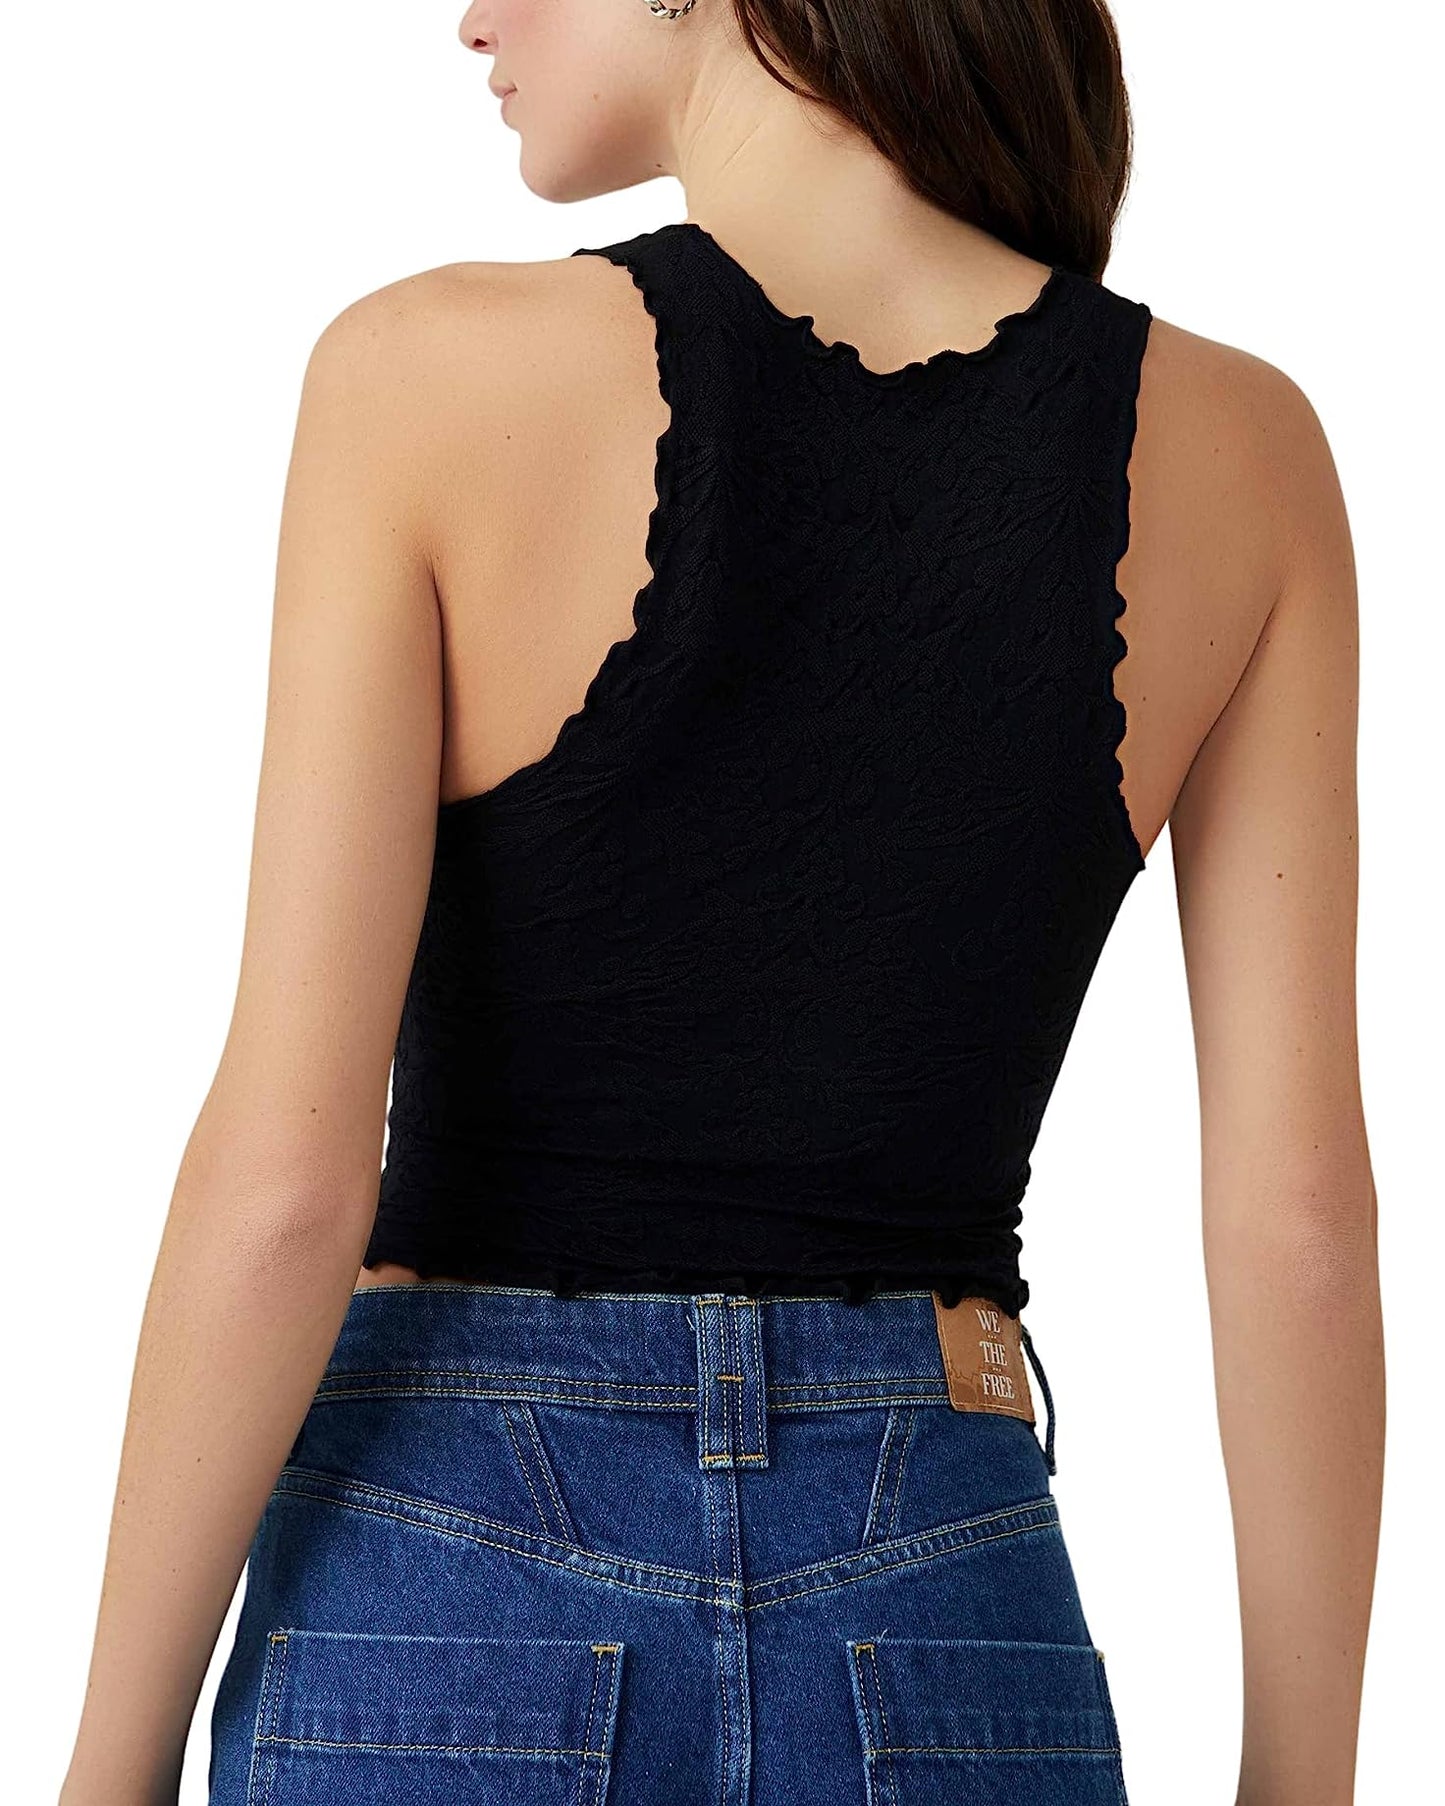 FREE PEOPLE HERE FOR YOU CAMI BLACK